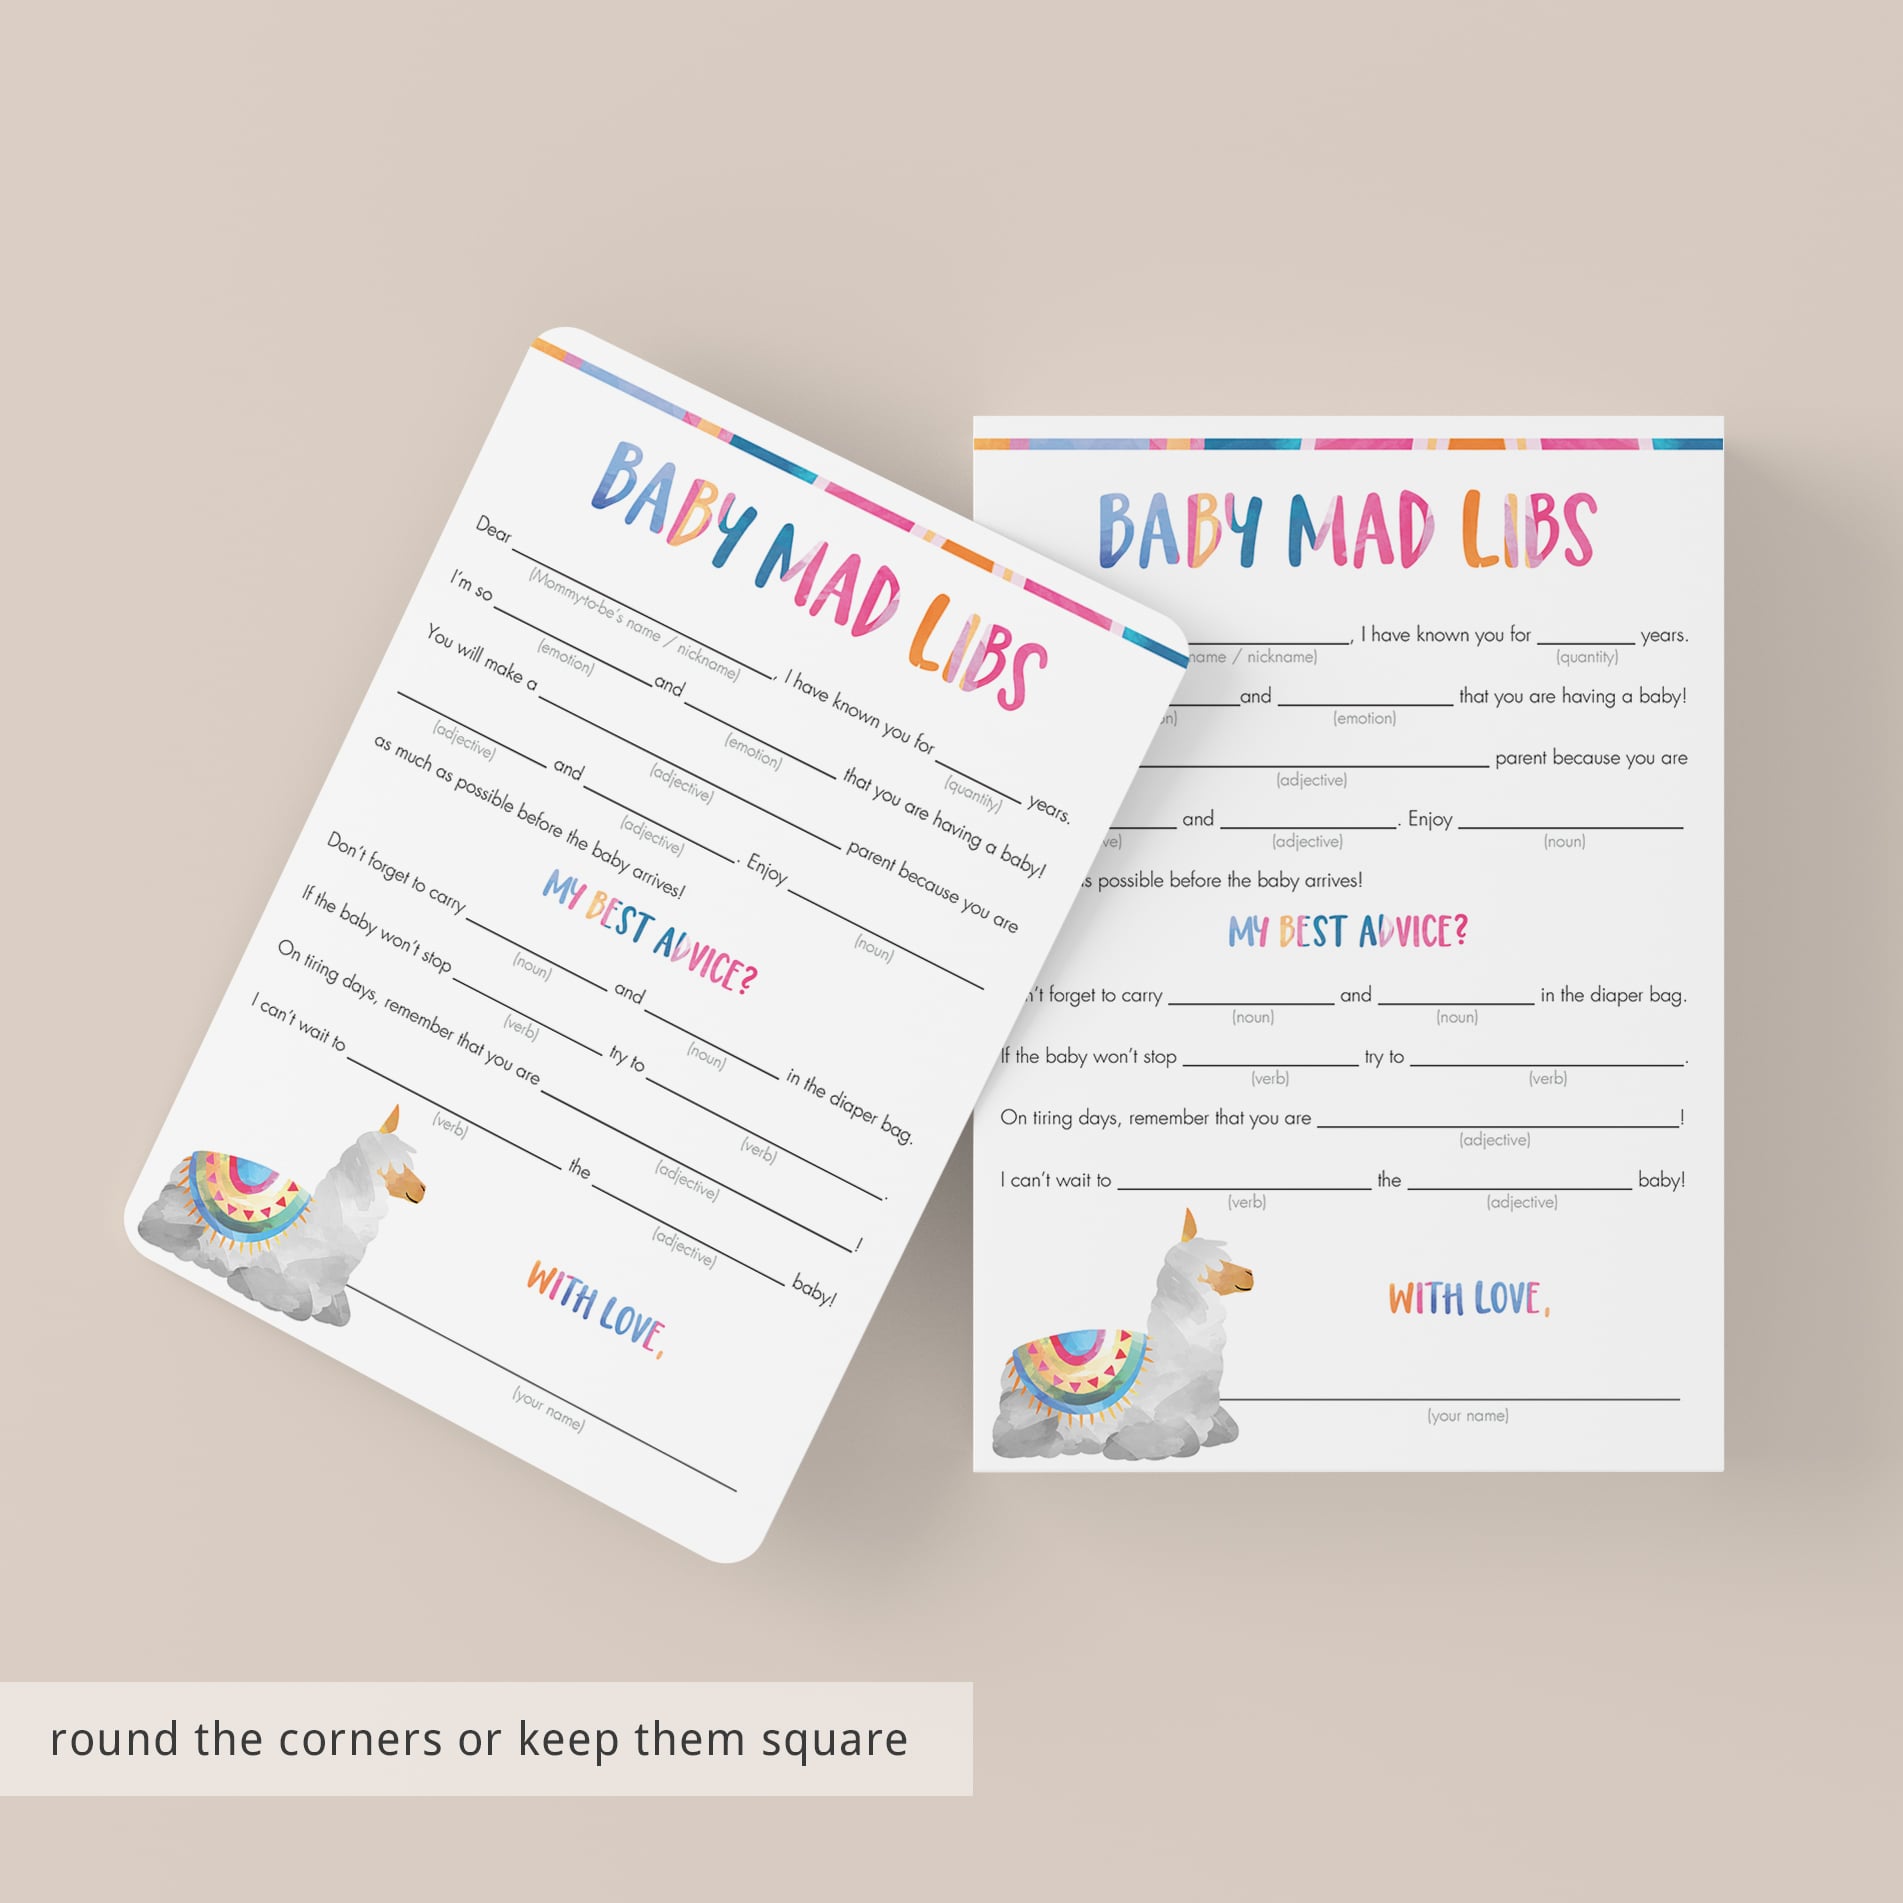 Funny baby mad libs cards printable by LittleSizzle